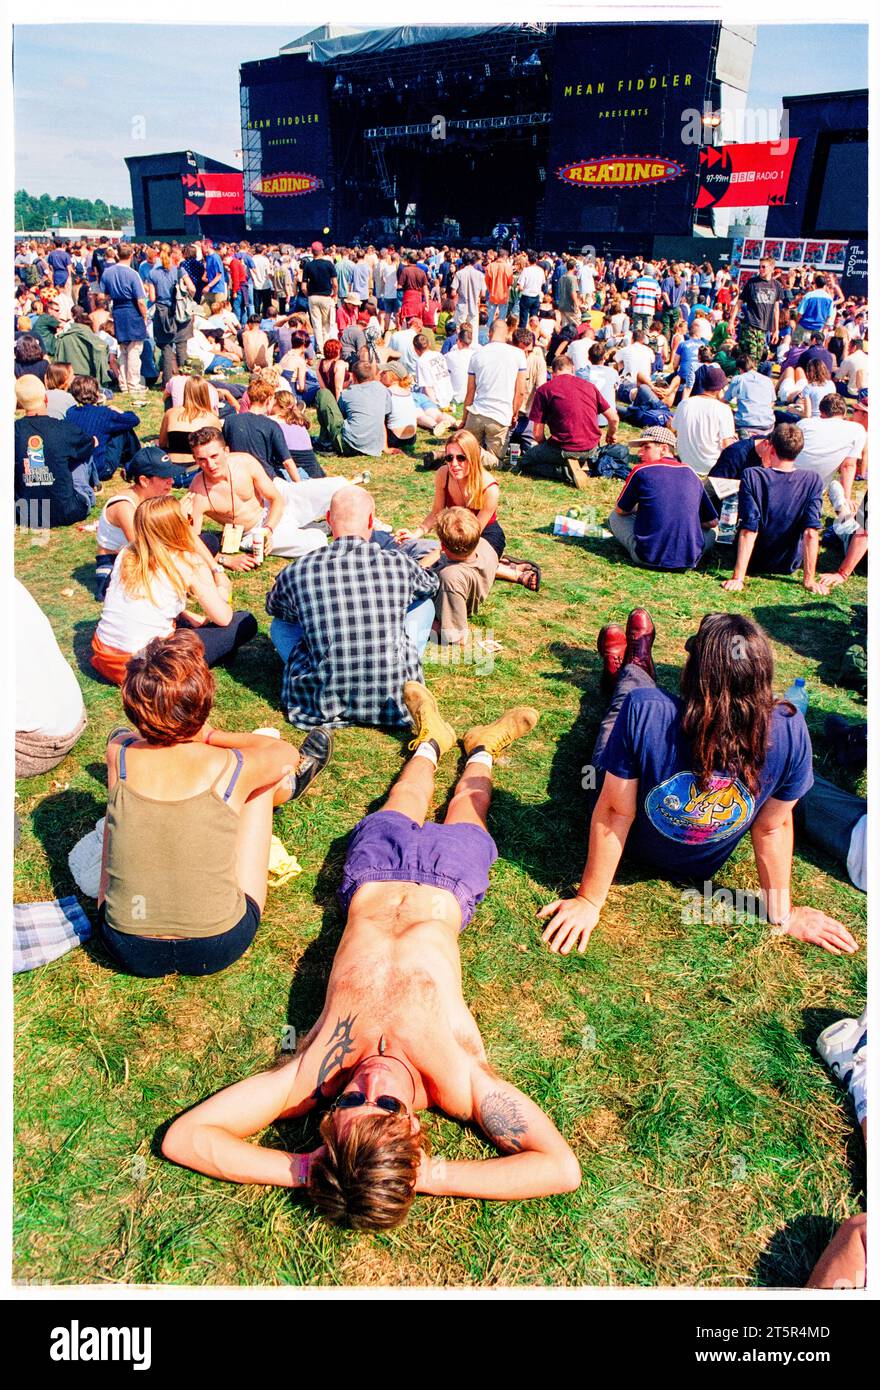 BRITPOP and ROCK FANS, READING FESTIVAL, 1998: A man chills and sunbathes in front of the main stage.. A scene from the site and crowd in the Main Stage arena area at Reading Festival 1998 on 28-30 August 1998 in Reading, England UK. Photo: Rob Watkins Stock Photo